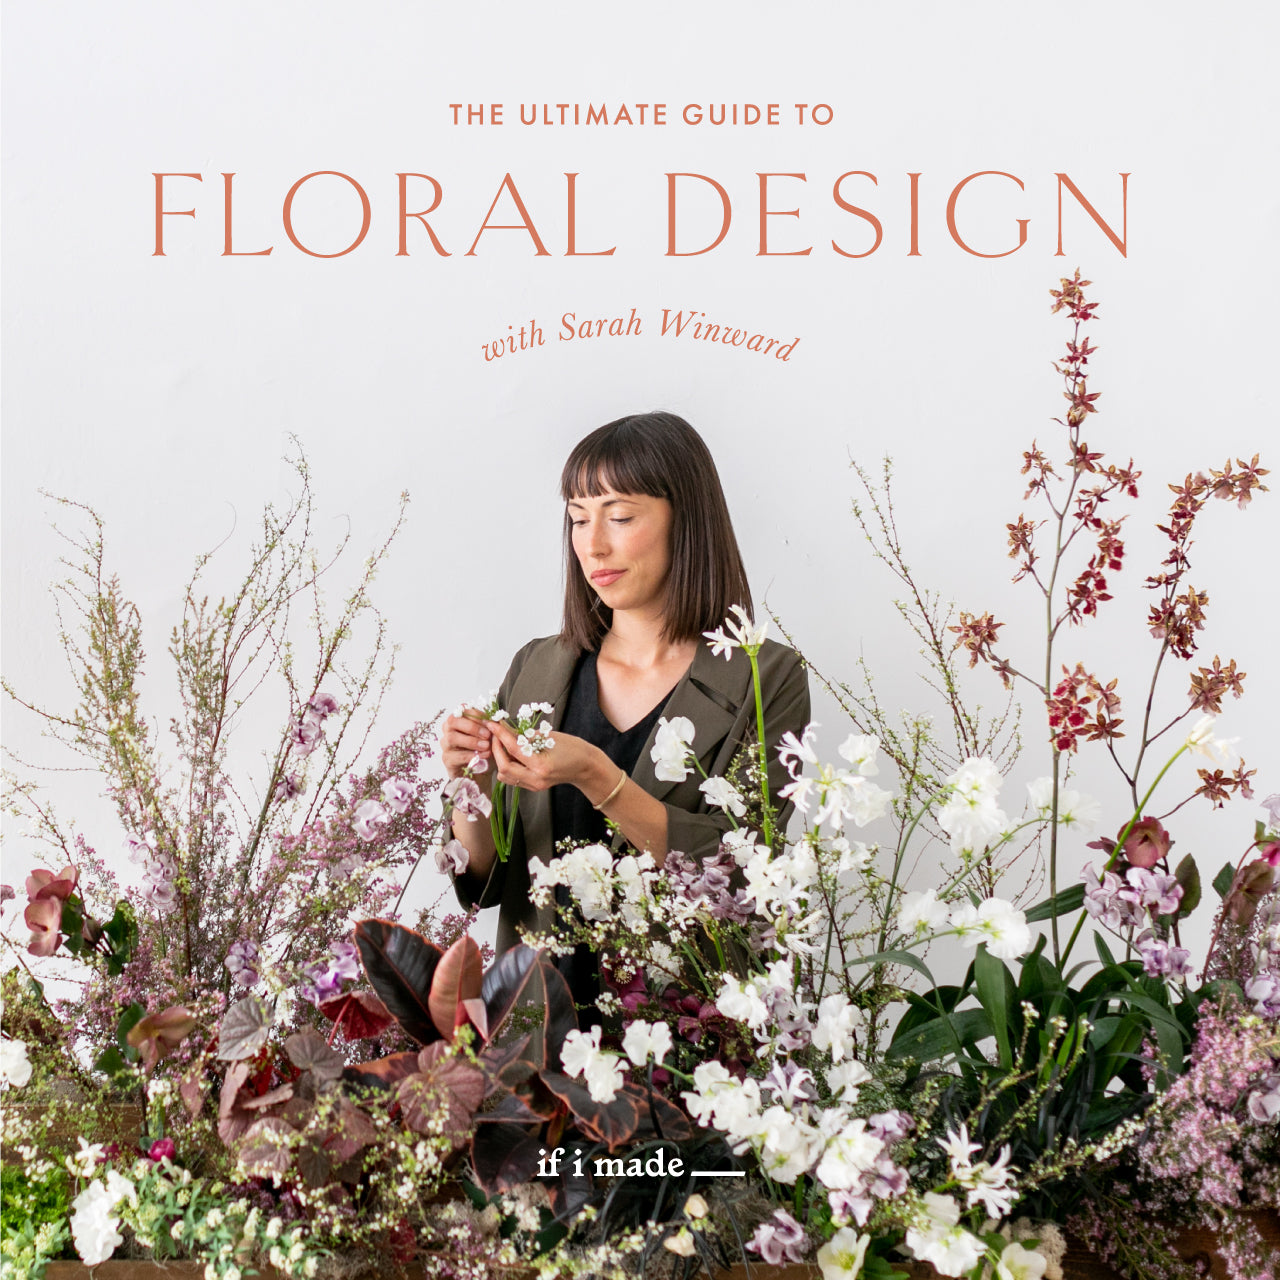 The Ultimate Guide to Floral Design with Sarah Winward (SPP0820) - 6 payments of $99